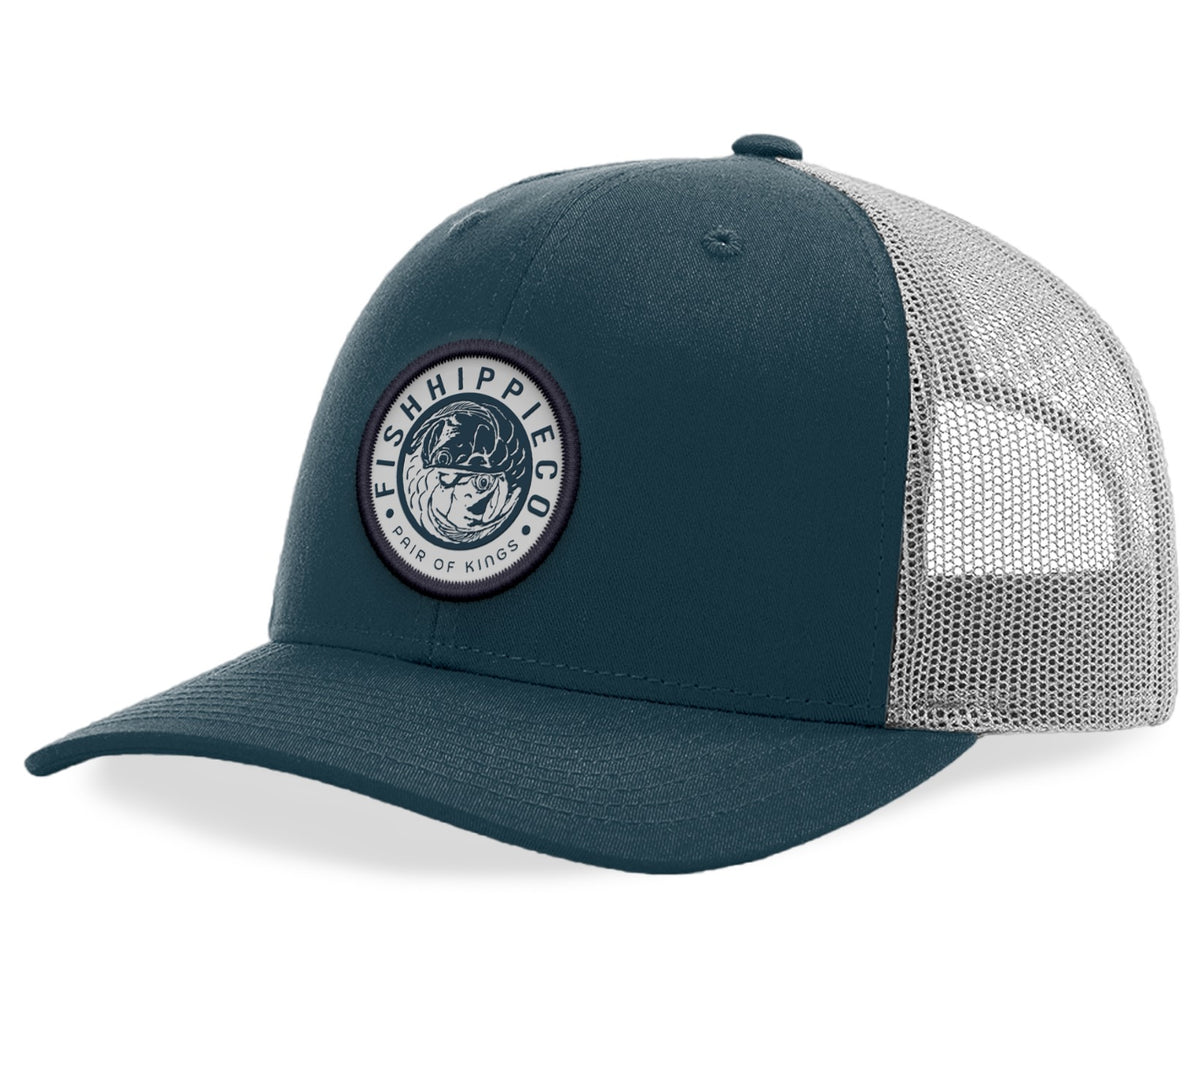 Pair Of Kings Trucker Hat - KC Outfitter